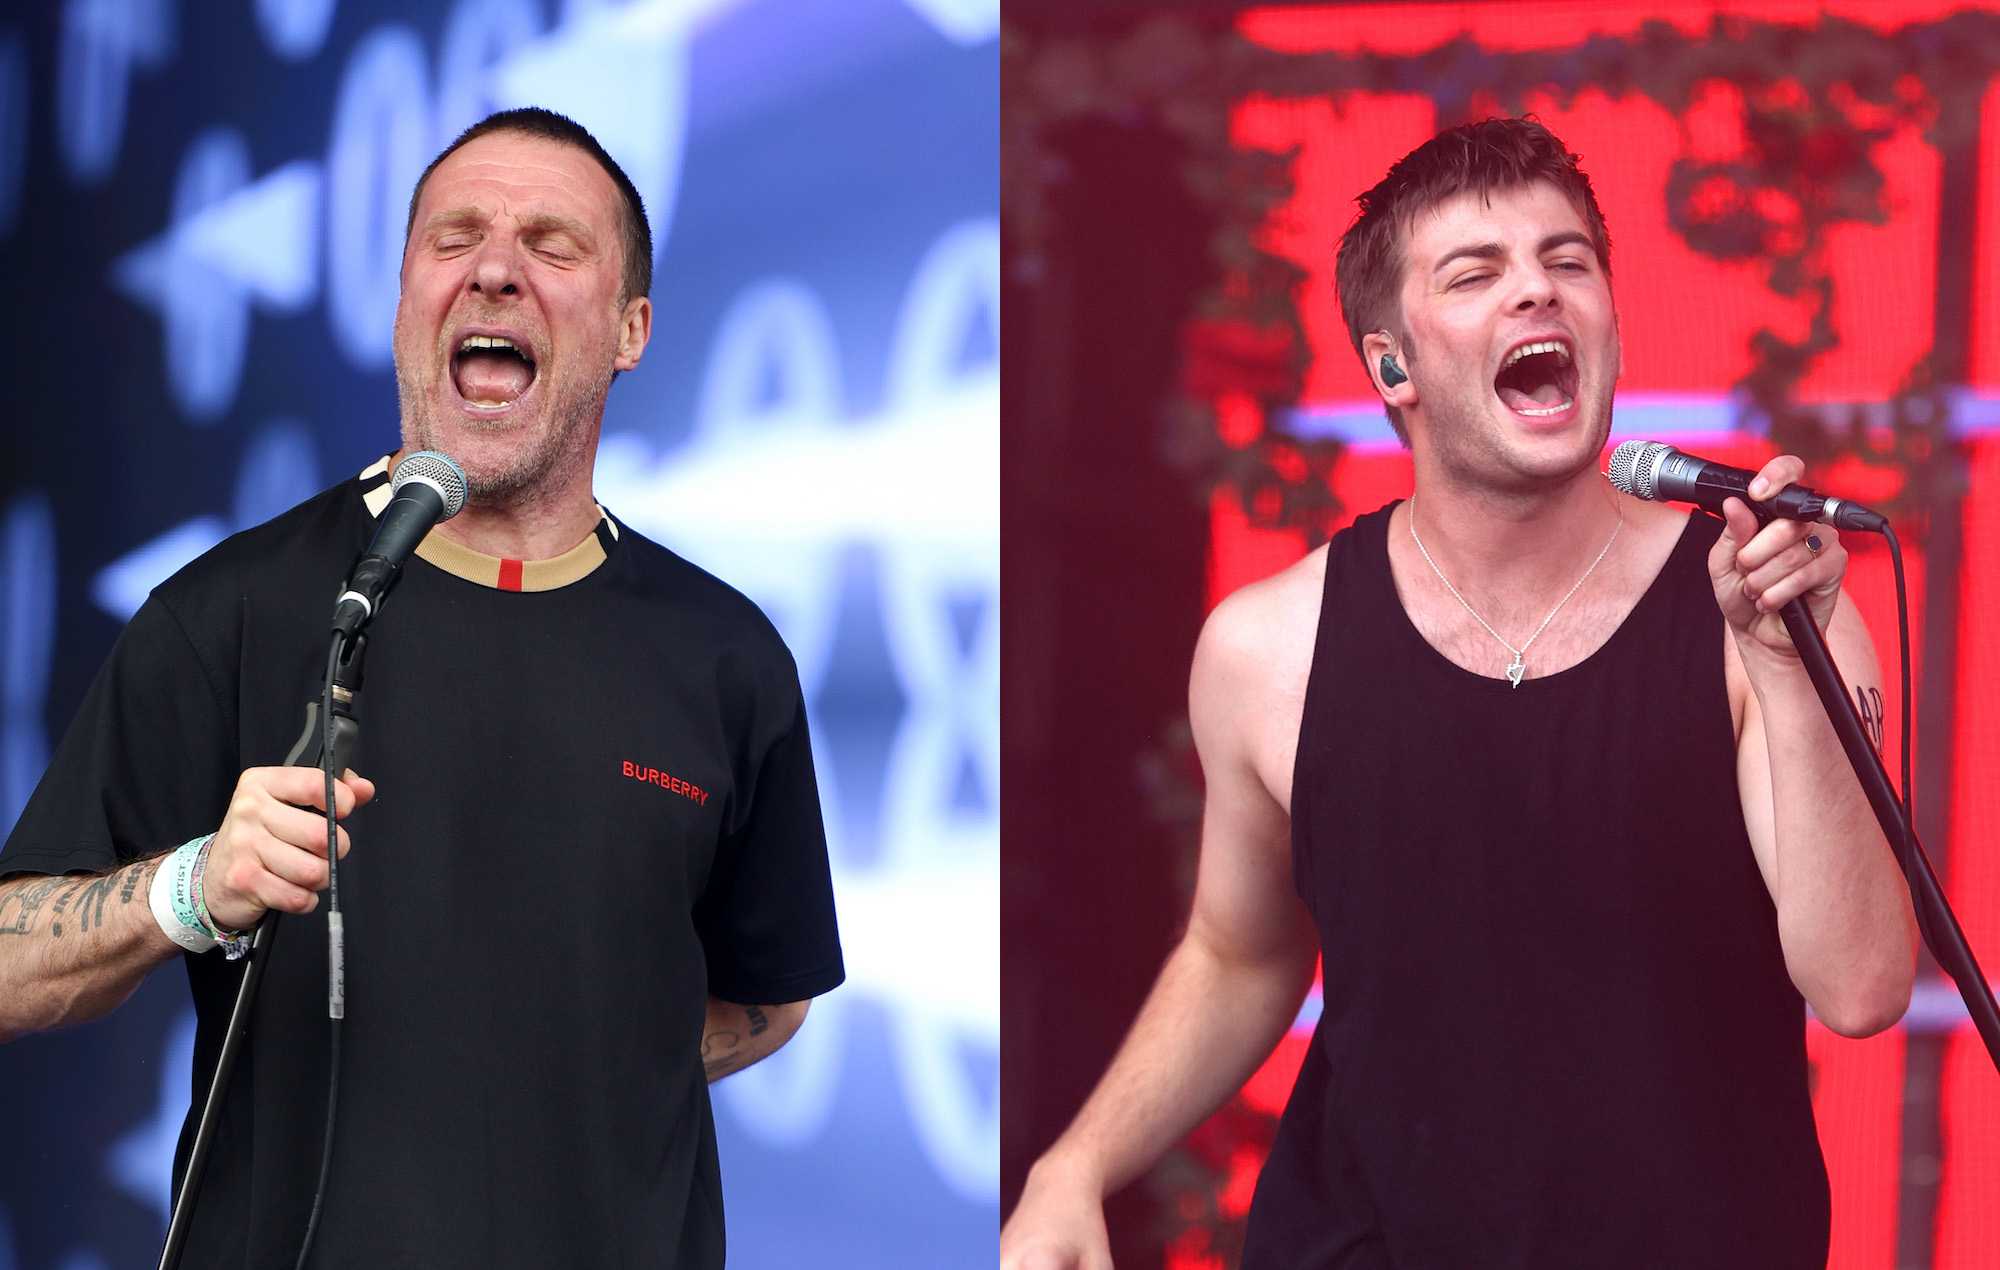 Sleaford Mods welcome Fontaines D.C. frontman Grian Chatten to ‘Late Night With Jason’ talk show